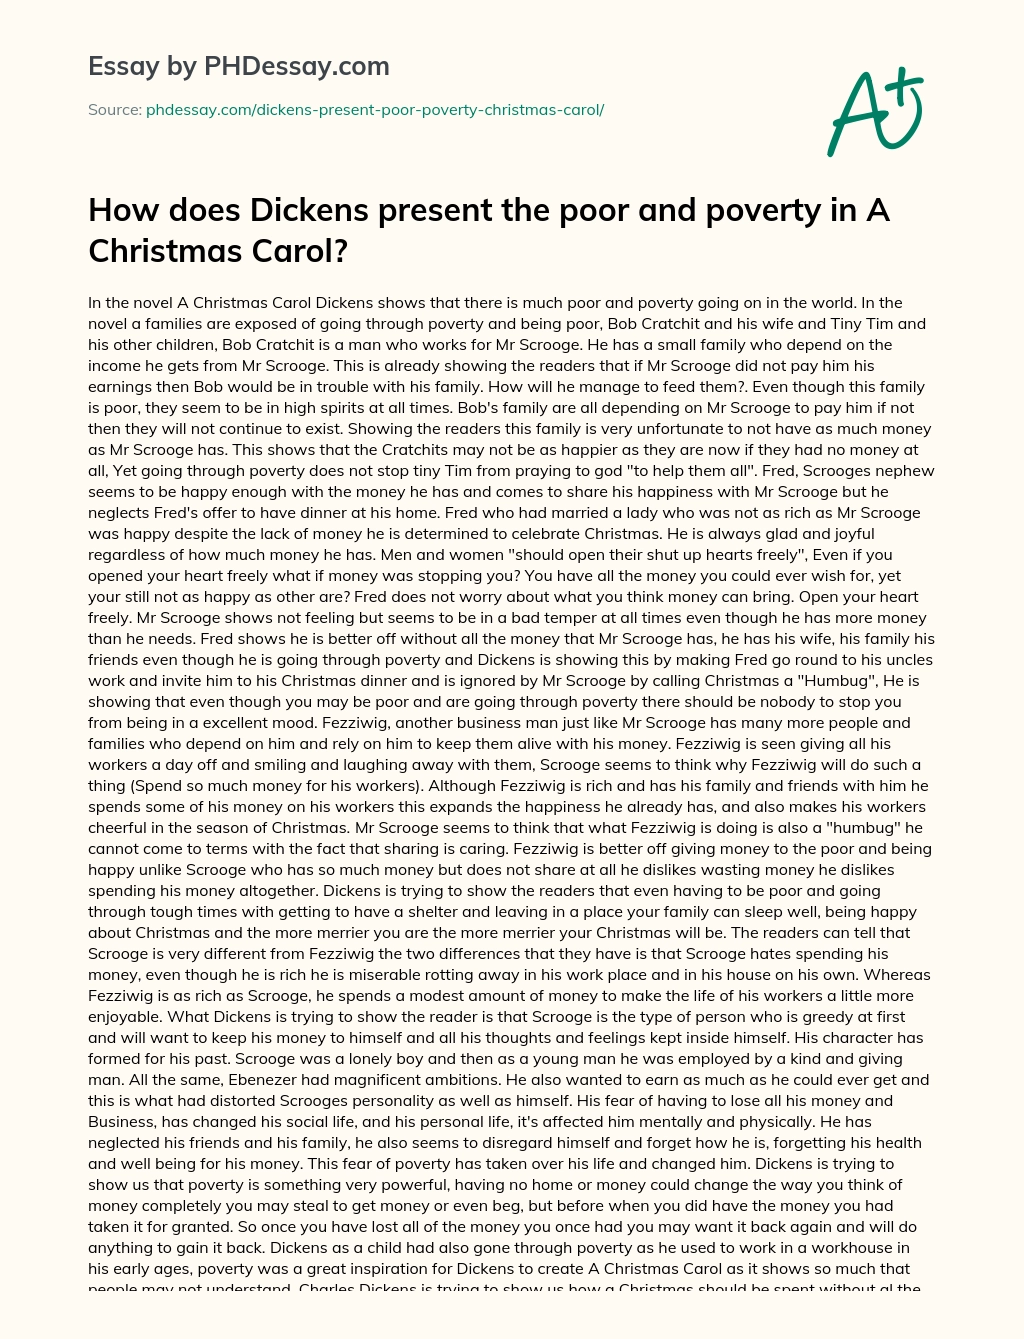 How does Dickens present the poor and poverty in A Christmas Carol? essay